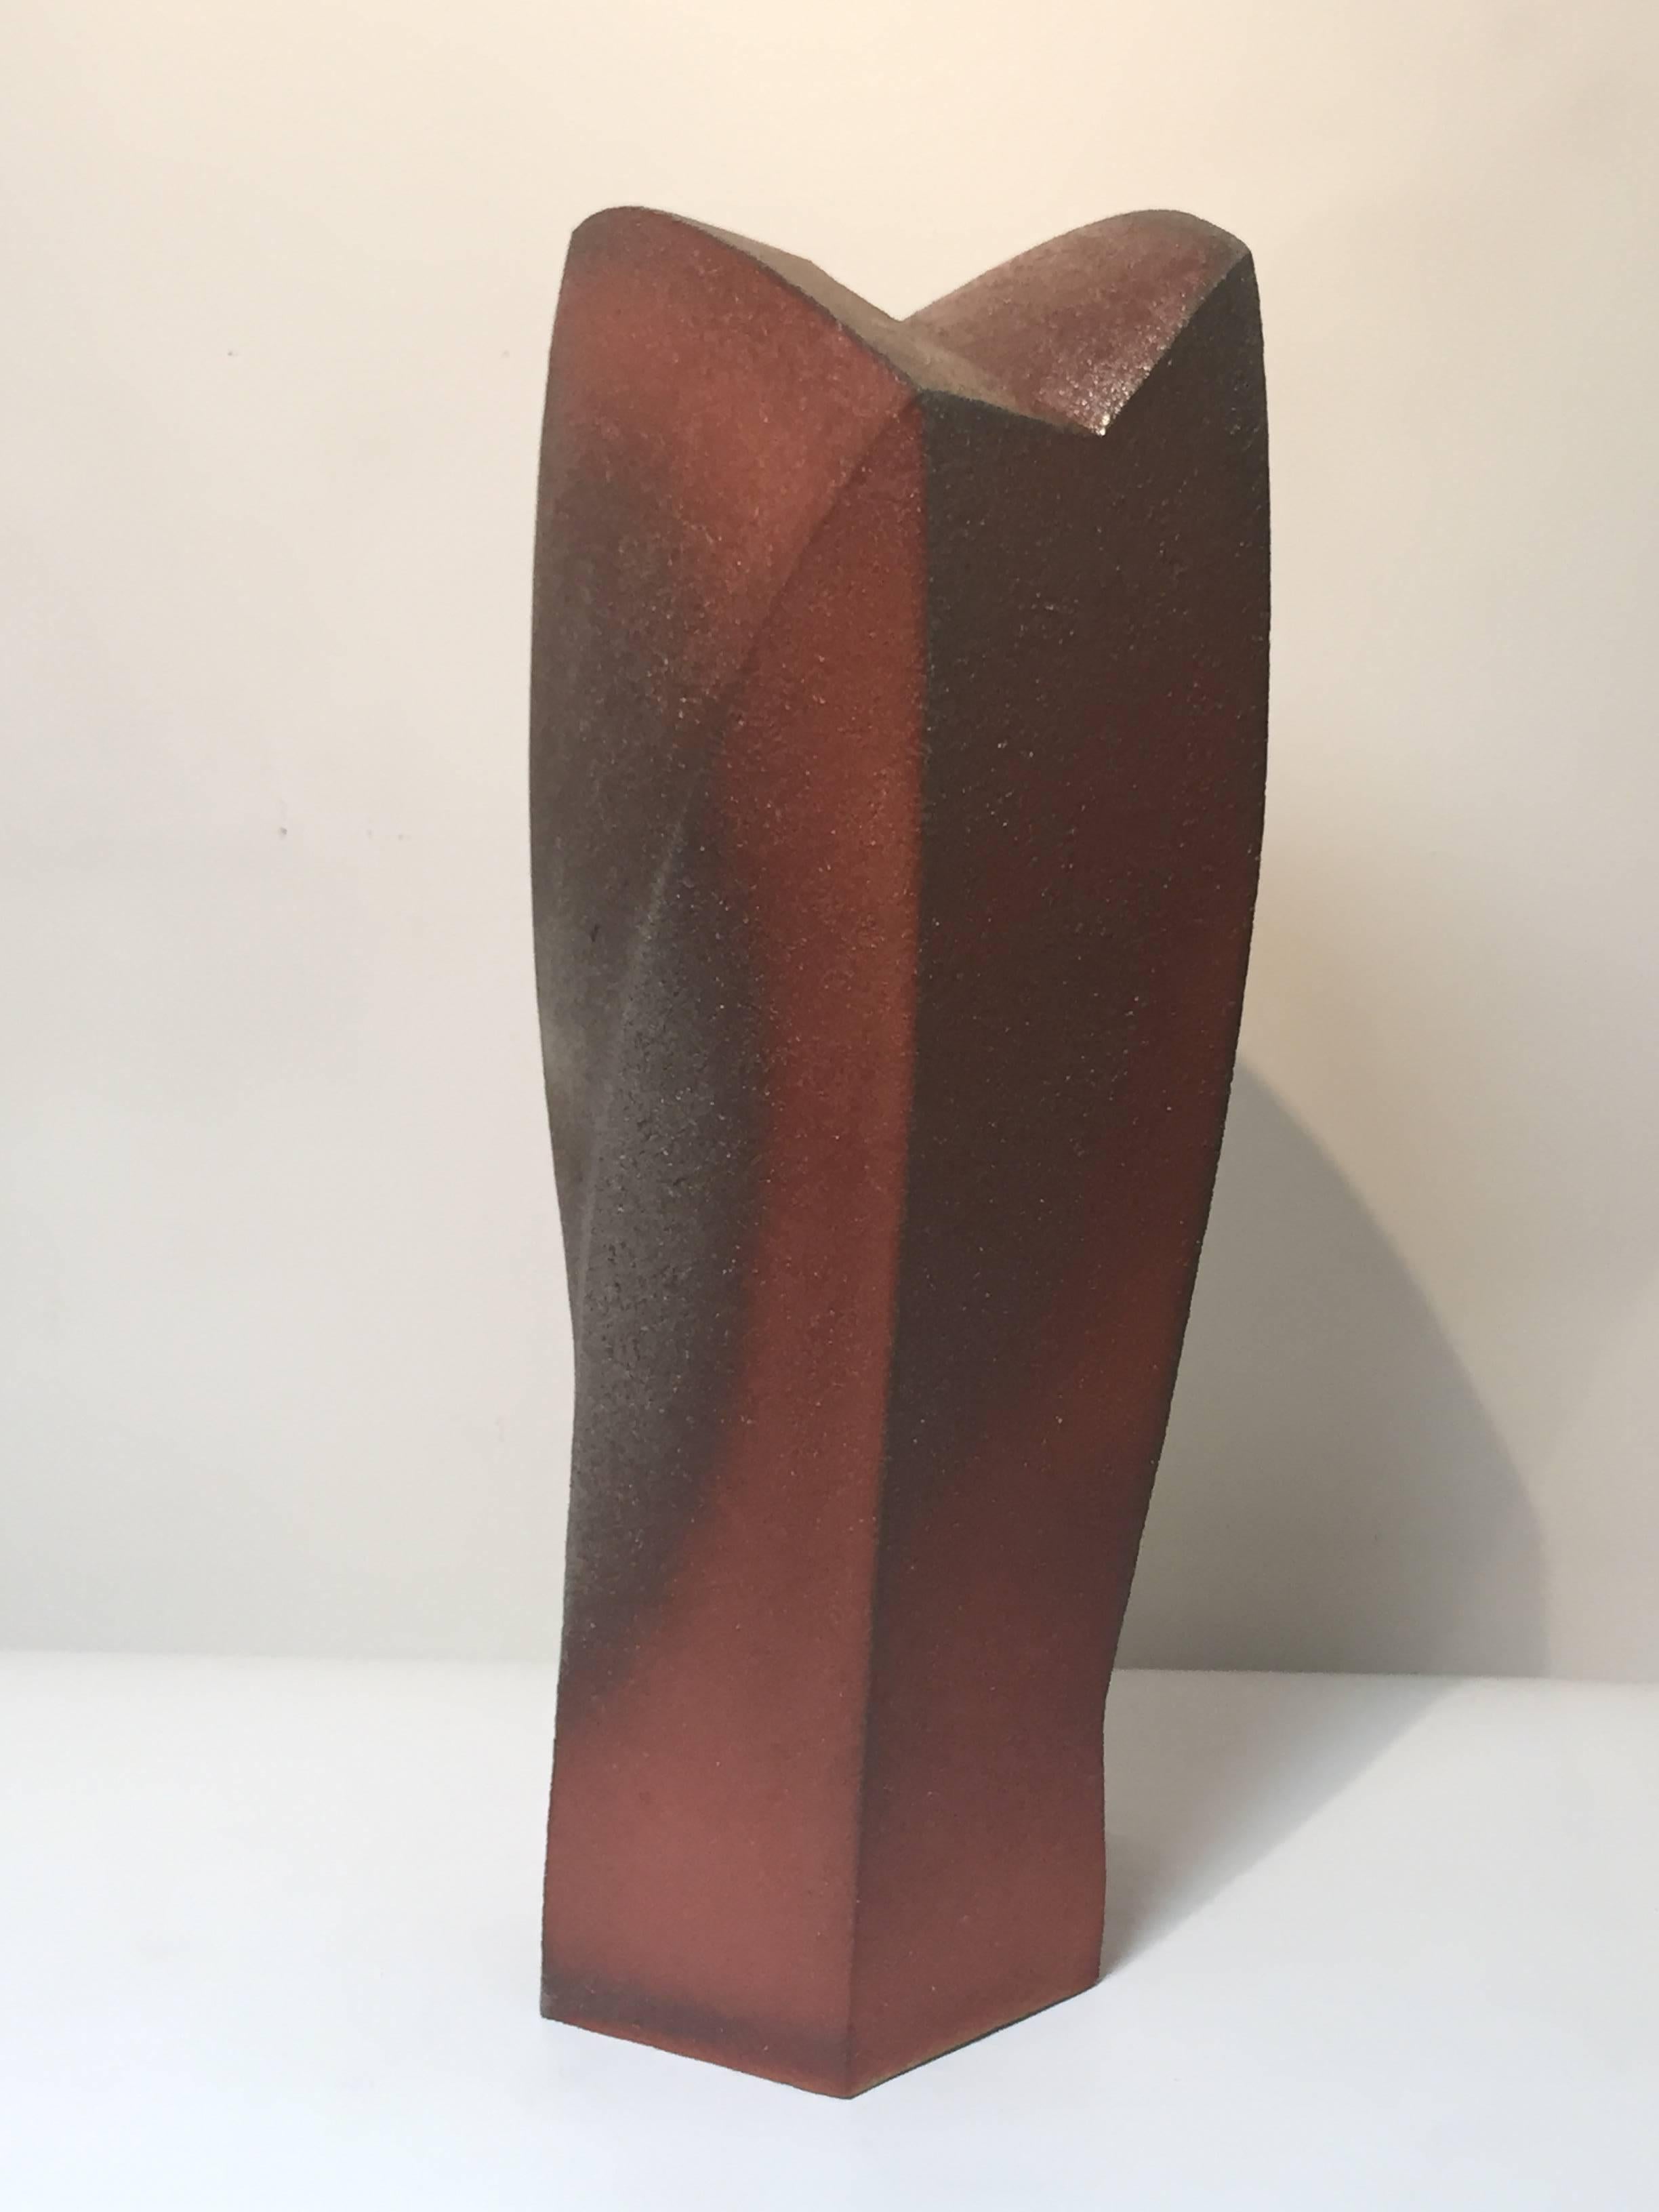 A large contemporary stoneware sculpture.
Hand built comprising five faceted sides. Each side distinct in shape, creating a bold, dynamic, and powerful result. The coarse burnt red clay casting shadows all-over the body.

Shunichi Yabe (1968- ) is